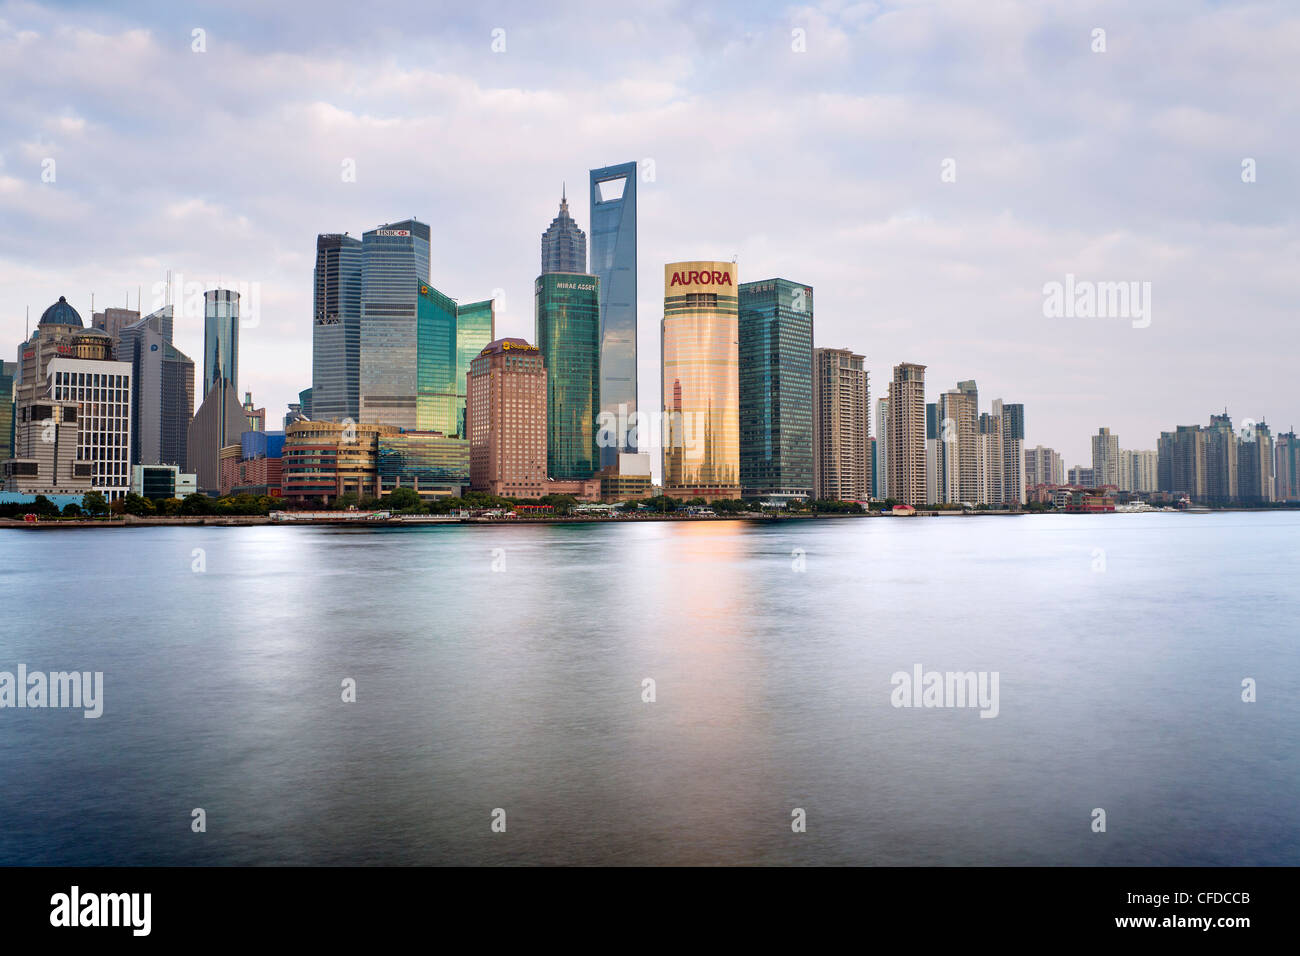 New Pudong skyline, looking across the Huangpu River from the Bund, Shanghai, China, Asia Stock Photo